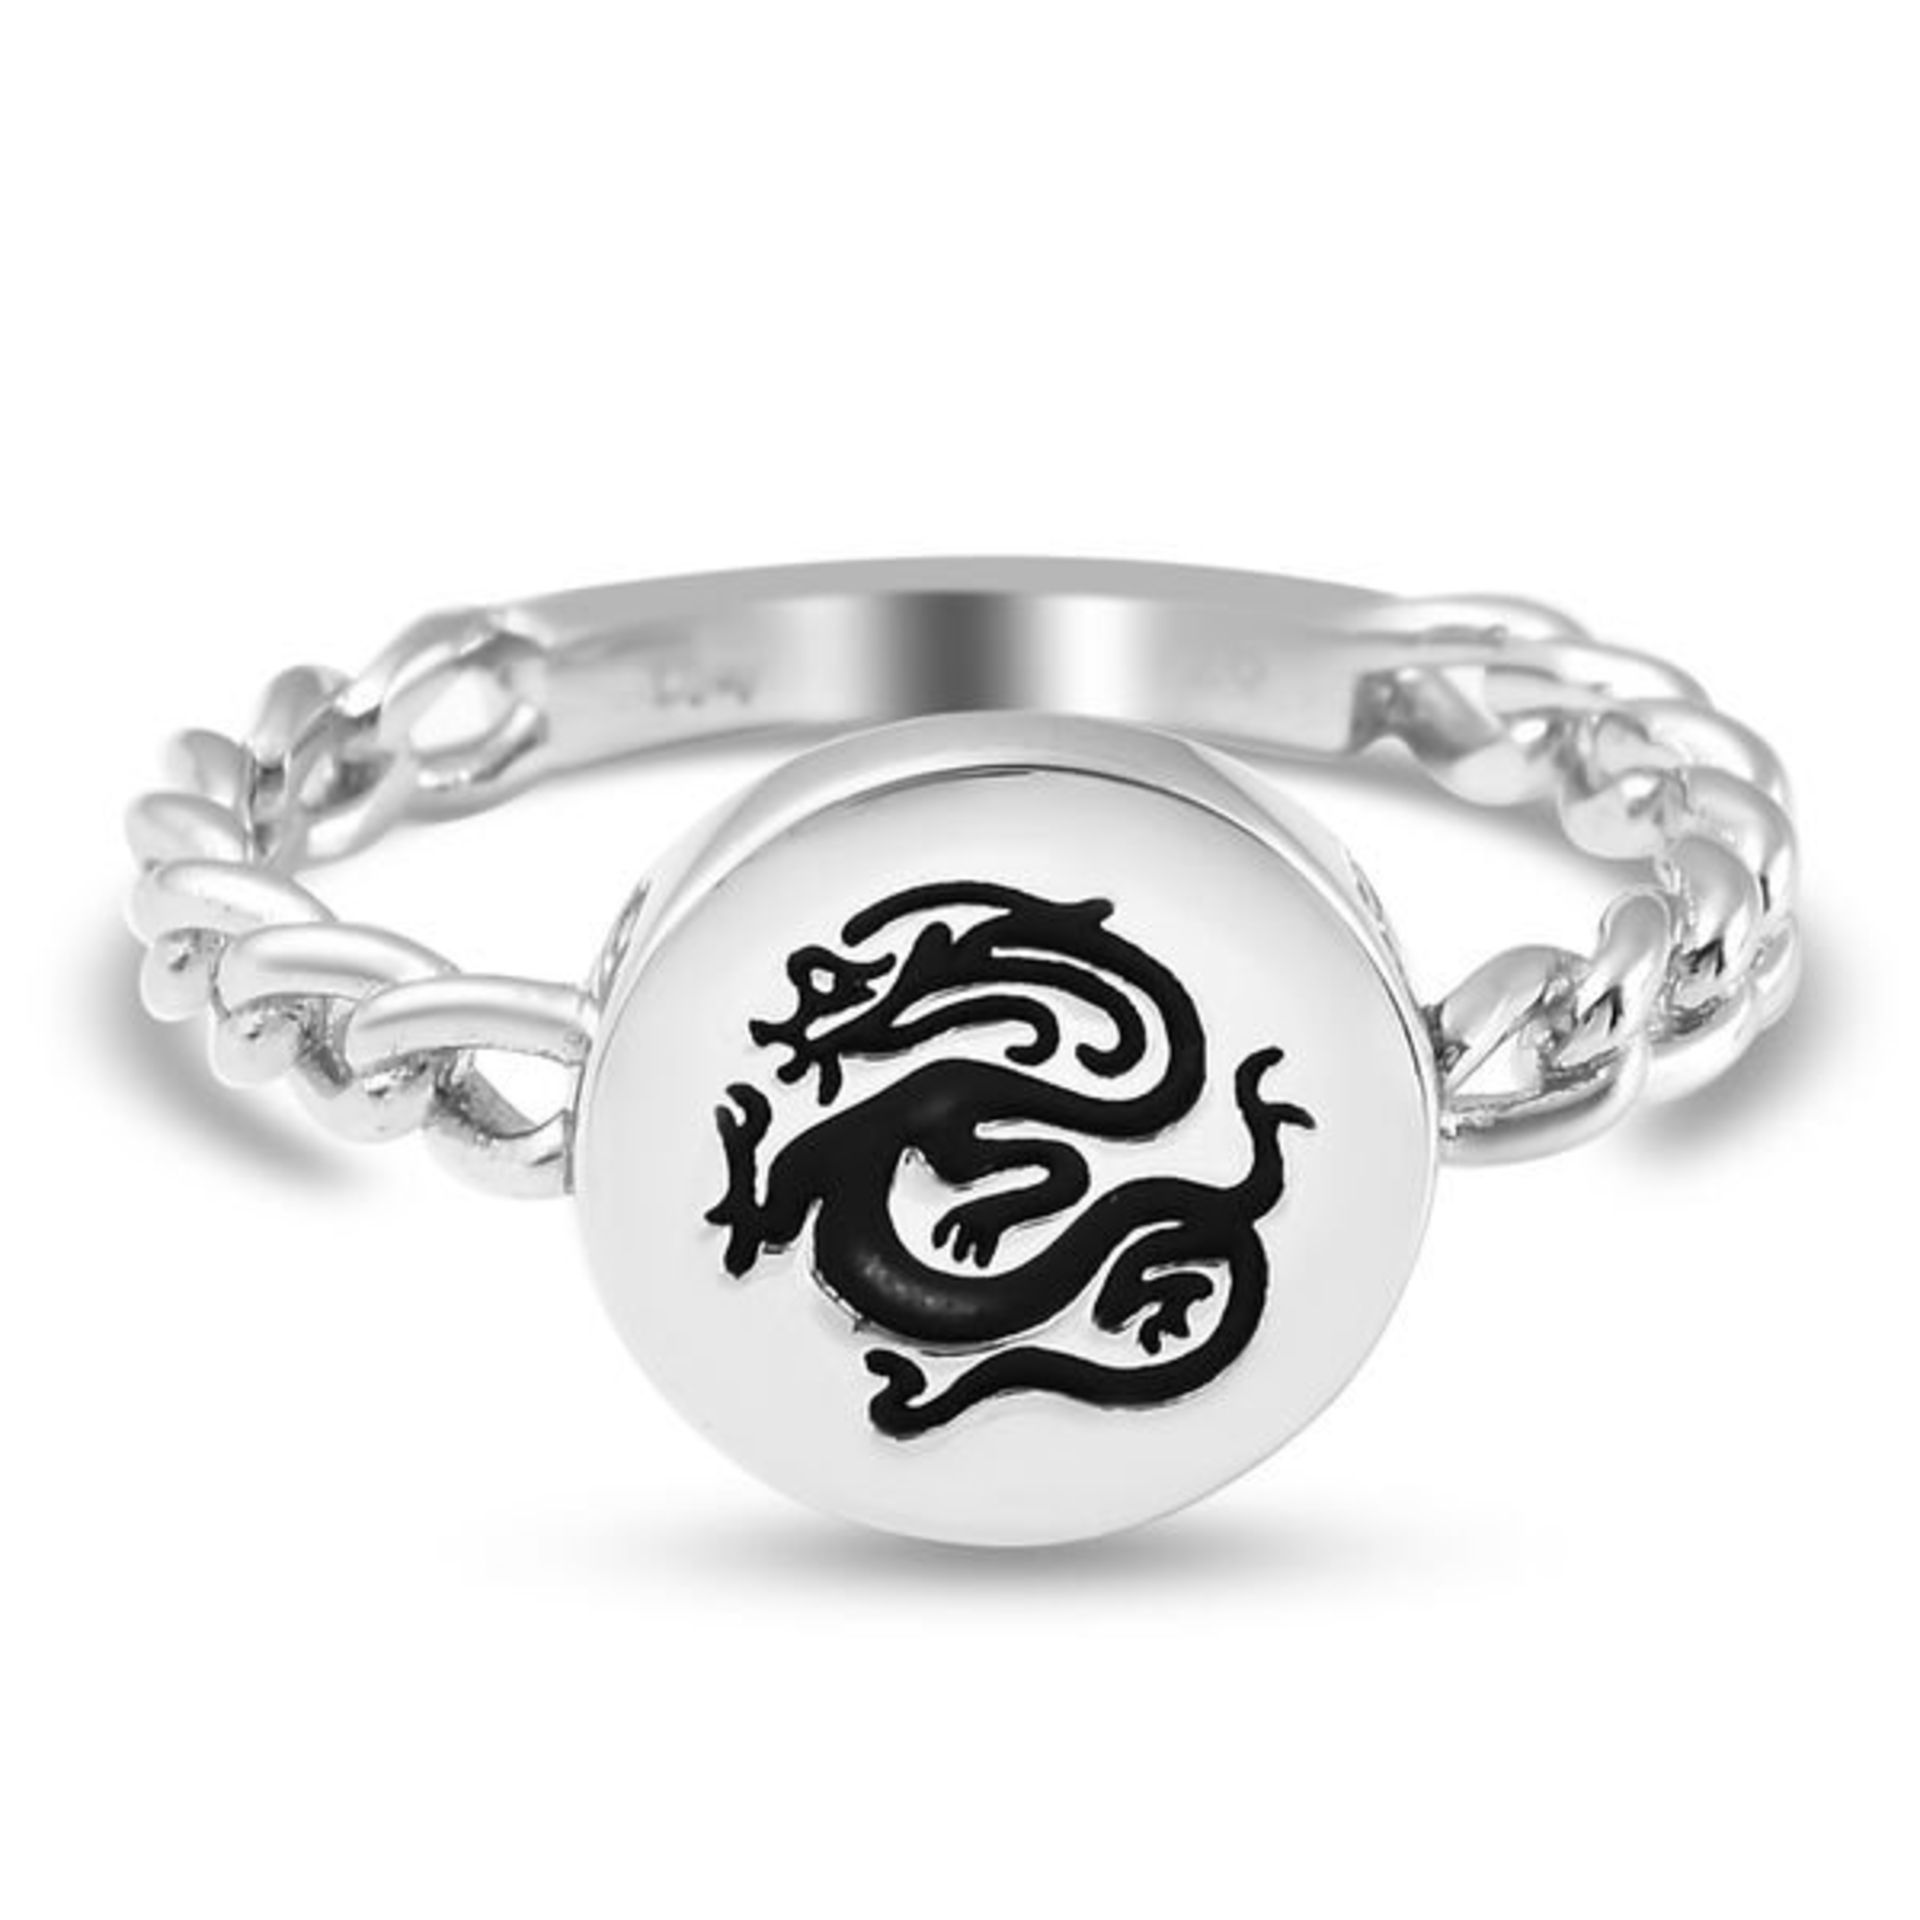 New! Sterling Silver Dragon Signet Ring - Image 2 of 5